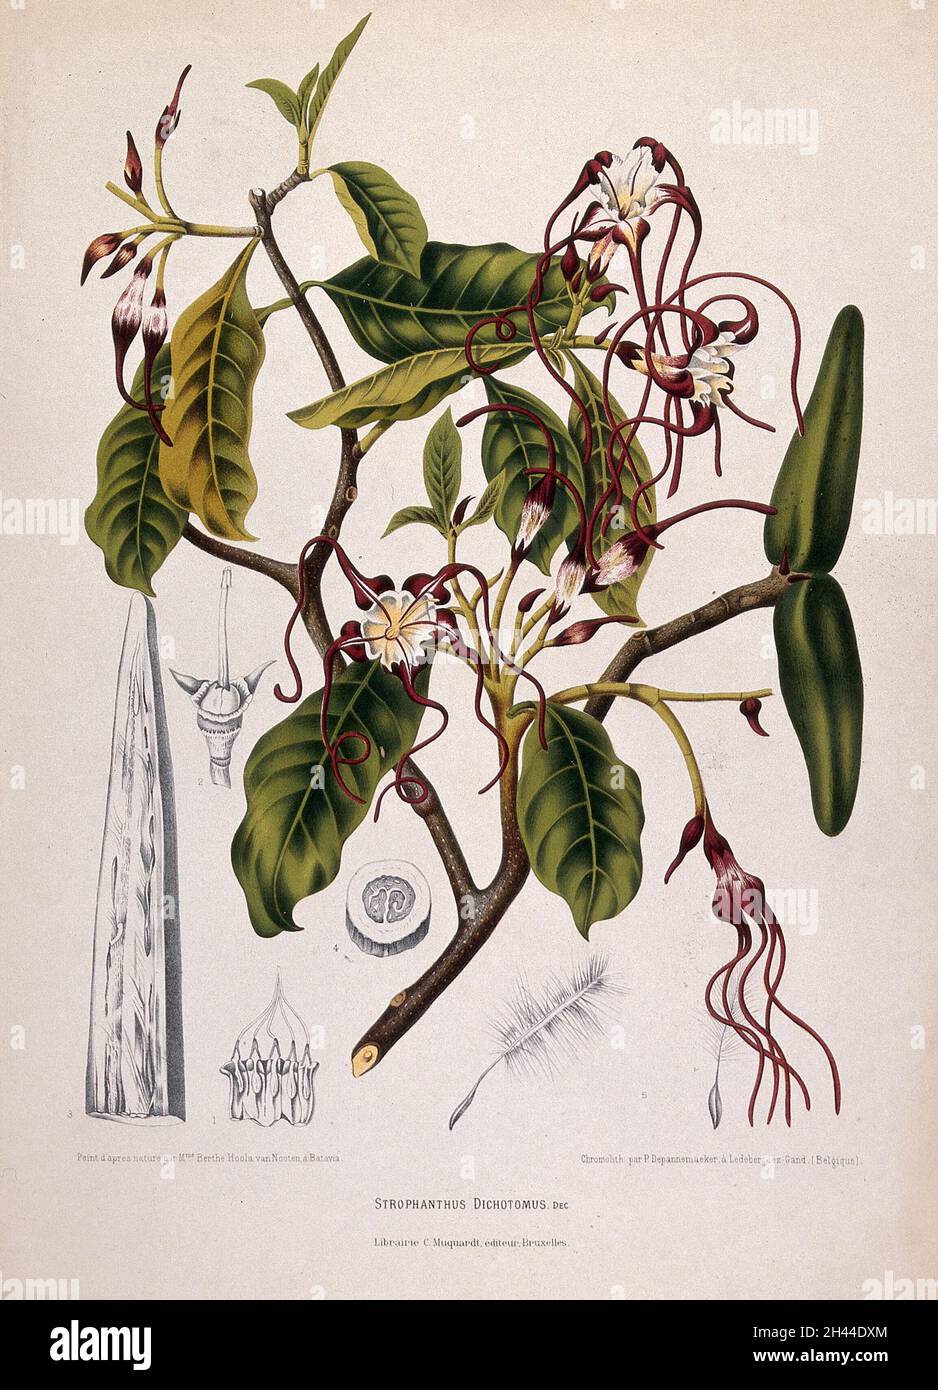 Strophanthus dichotomus Decne.: flowering branch with separate numbered sections of flower, follicle and seed. Chromolithograph by P. Depannemaeker, c.1885, after B. Hoola van Nooten. Stock Photo